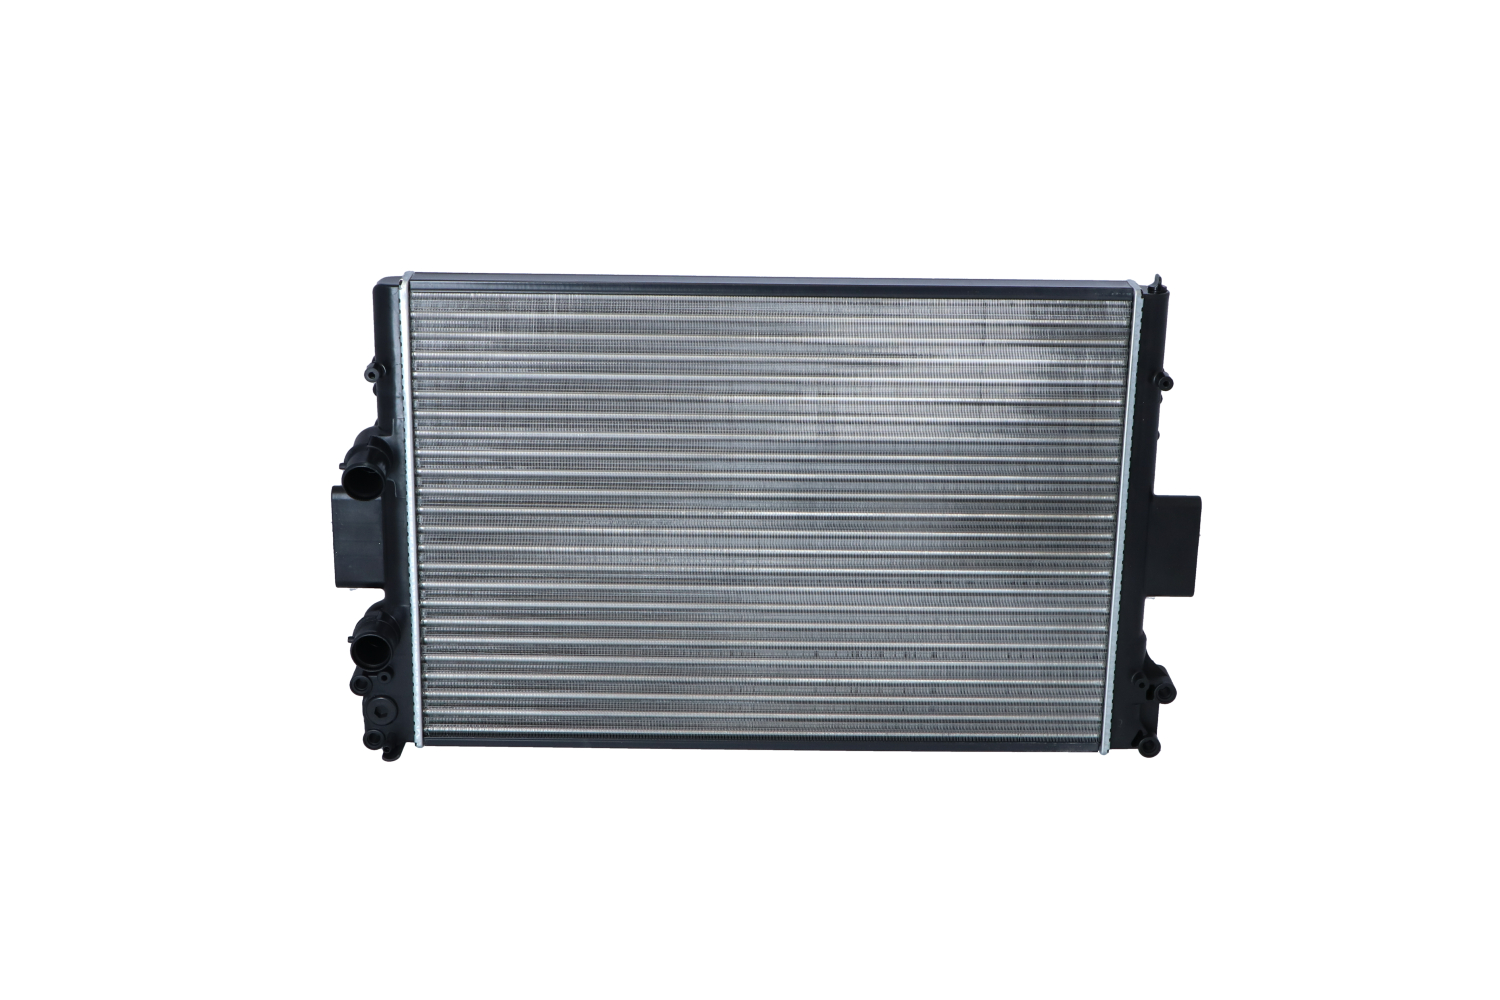 NRF 53612 Engine radiator Aluminium, 650 x 453 x 34 mm, Mechanically jointed cooling fins